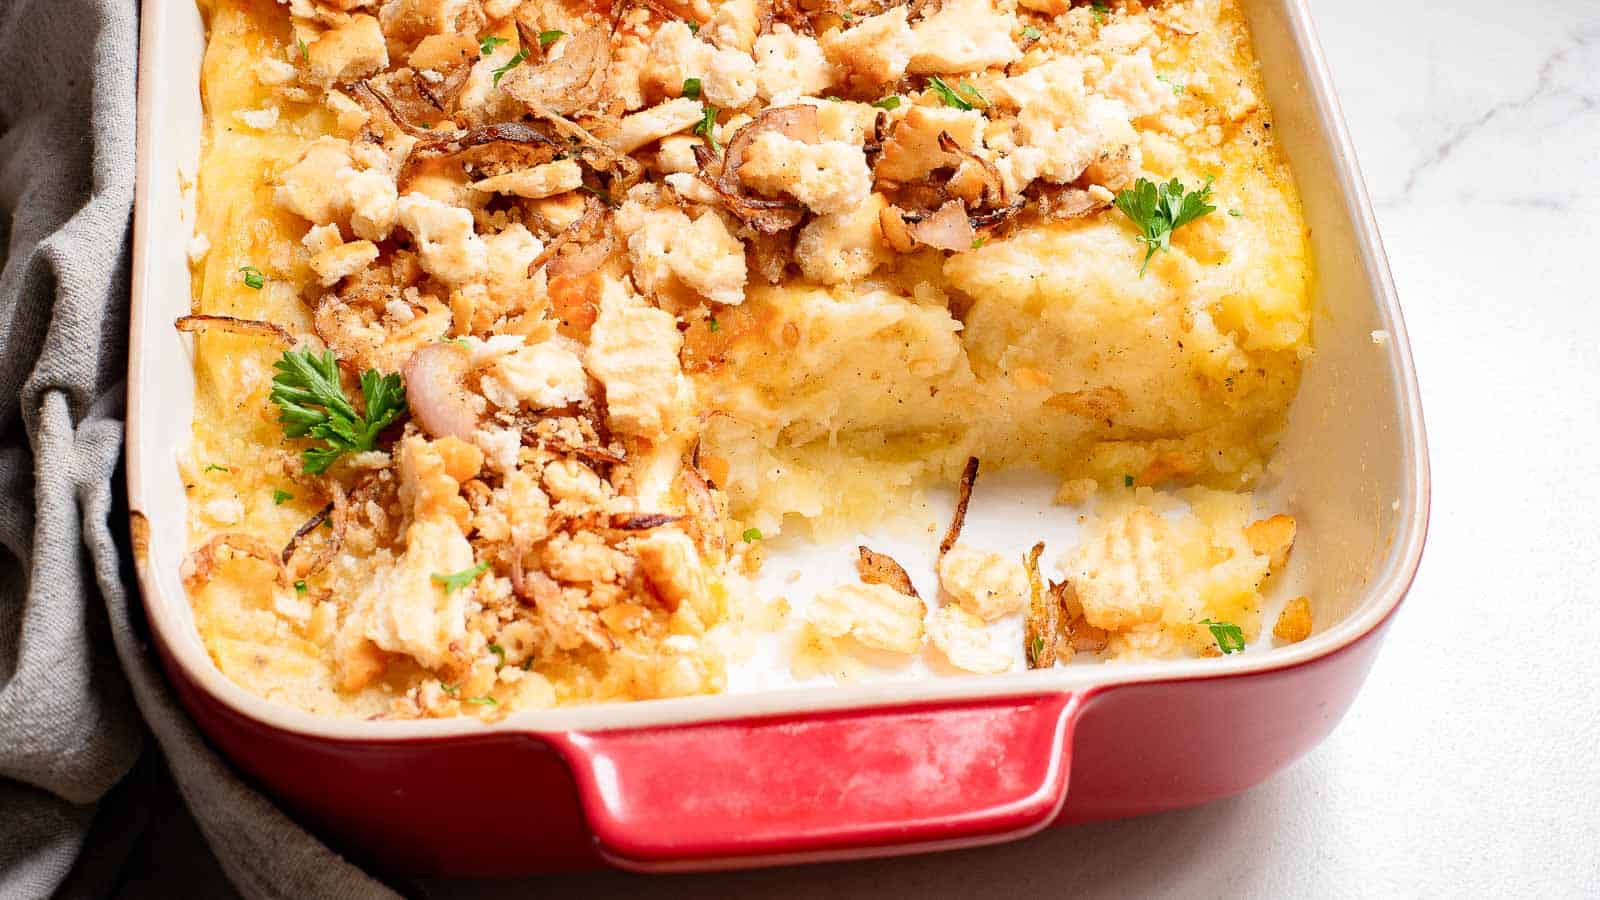 Mashed potato casserole in a baking dish with a cracker crumb topping.